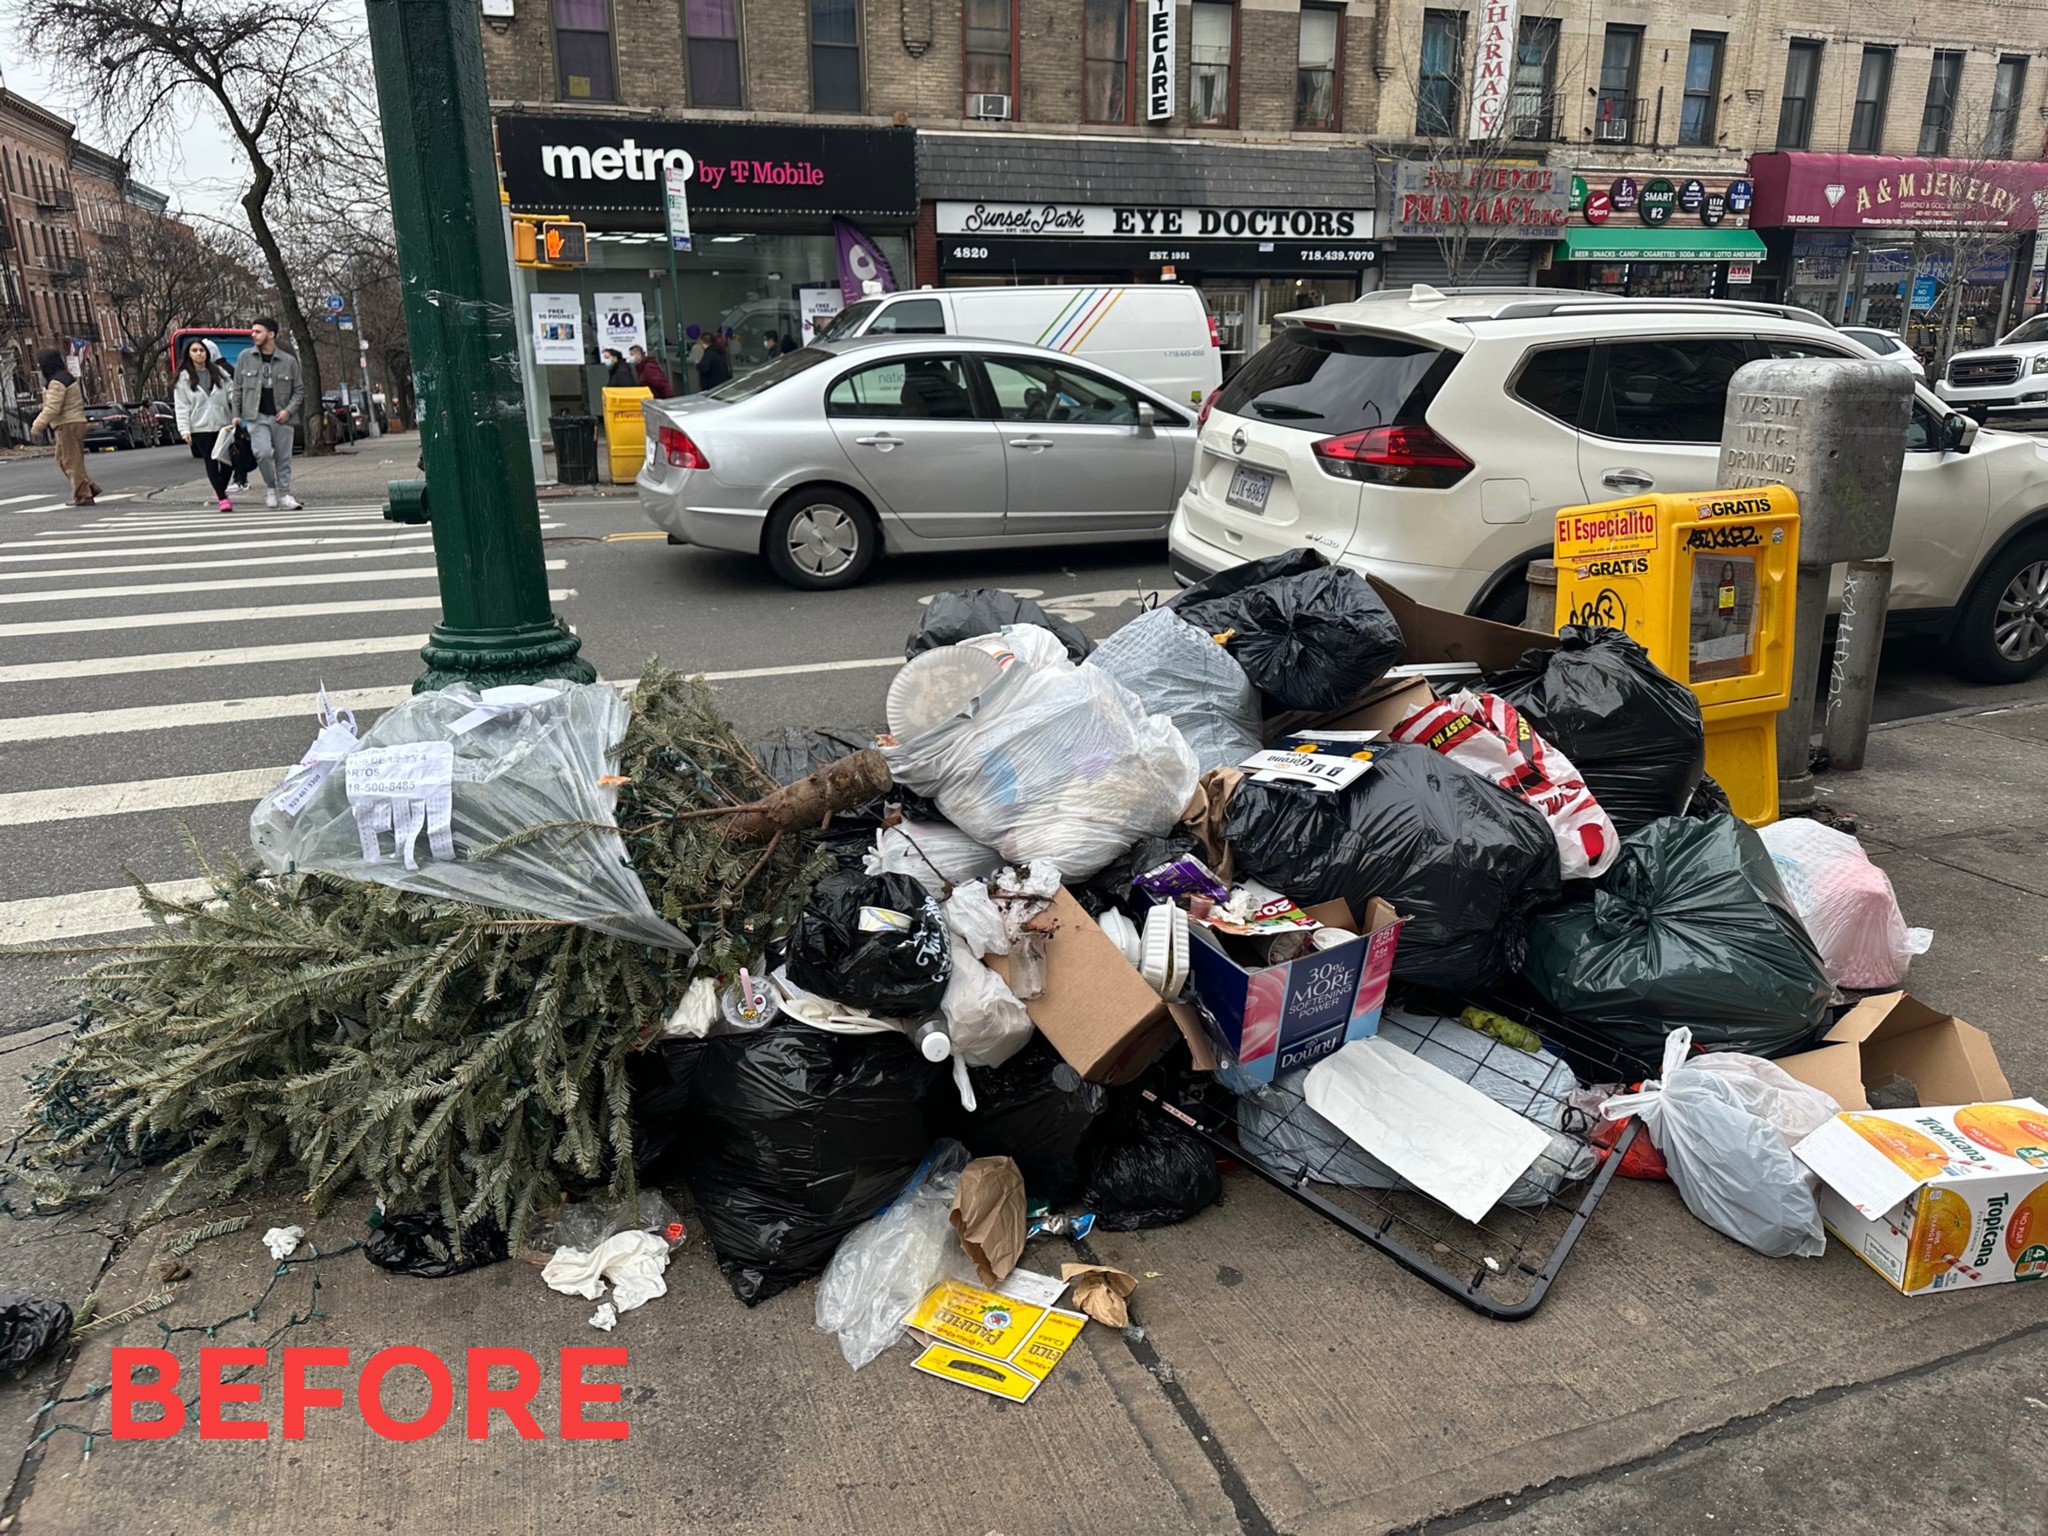 A pile of garbage on a city street corner, including bags, discarded boxes, and a christmas tree, with a 'before' sign at the bottom and traffic in the background.